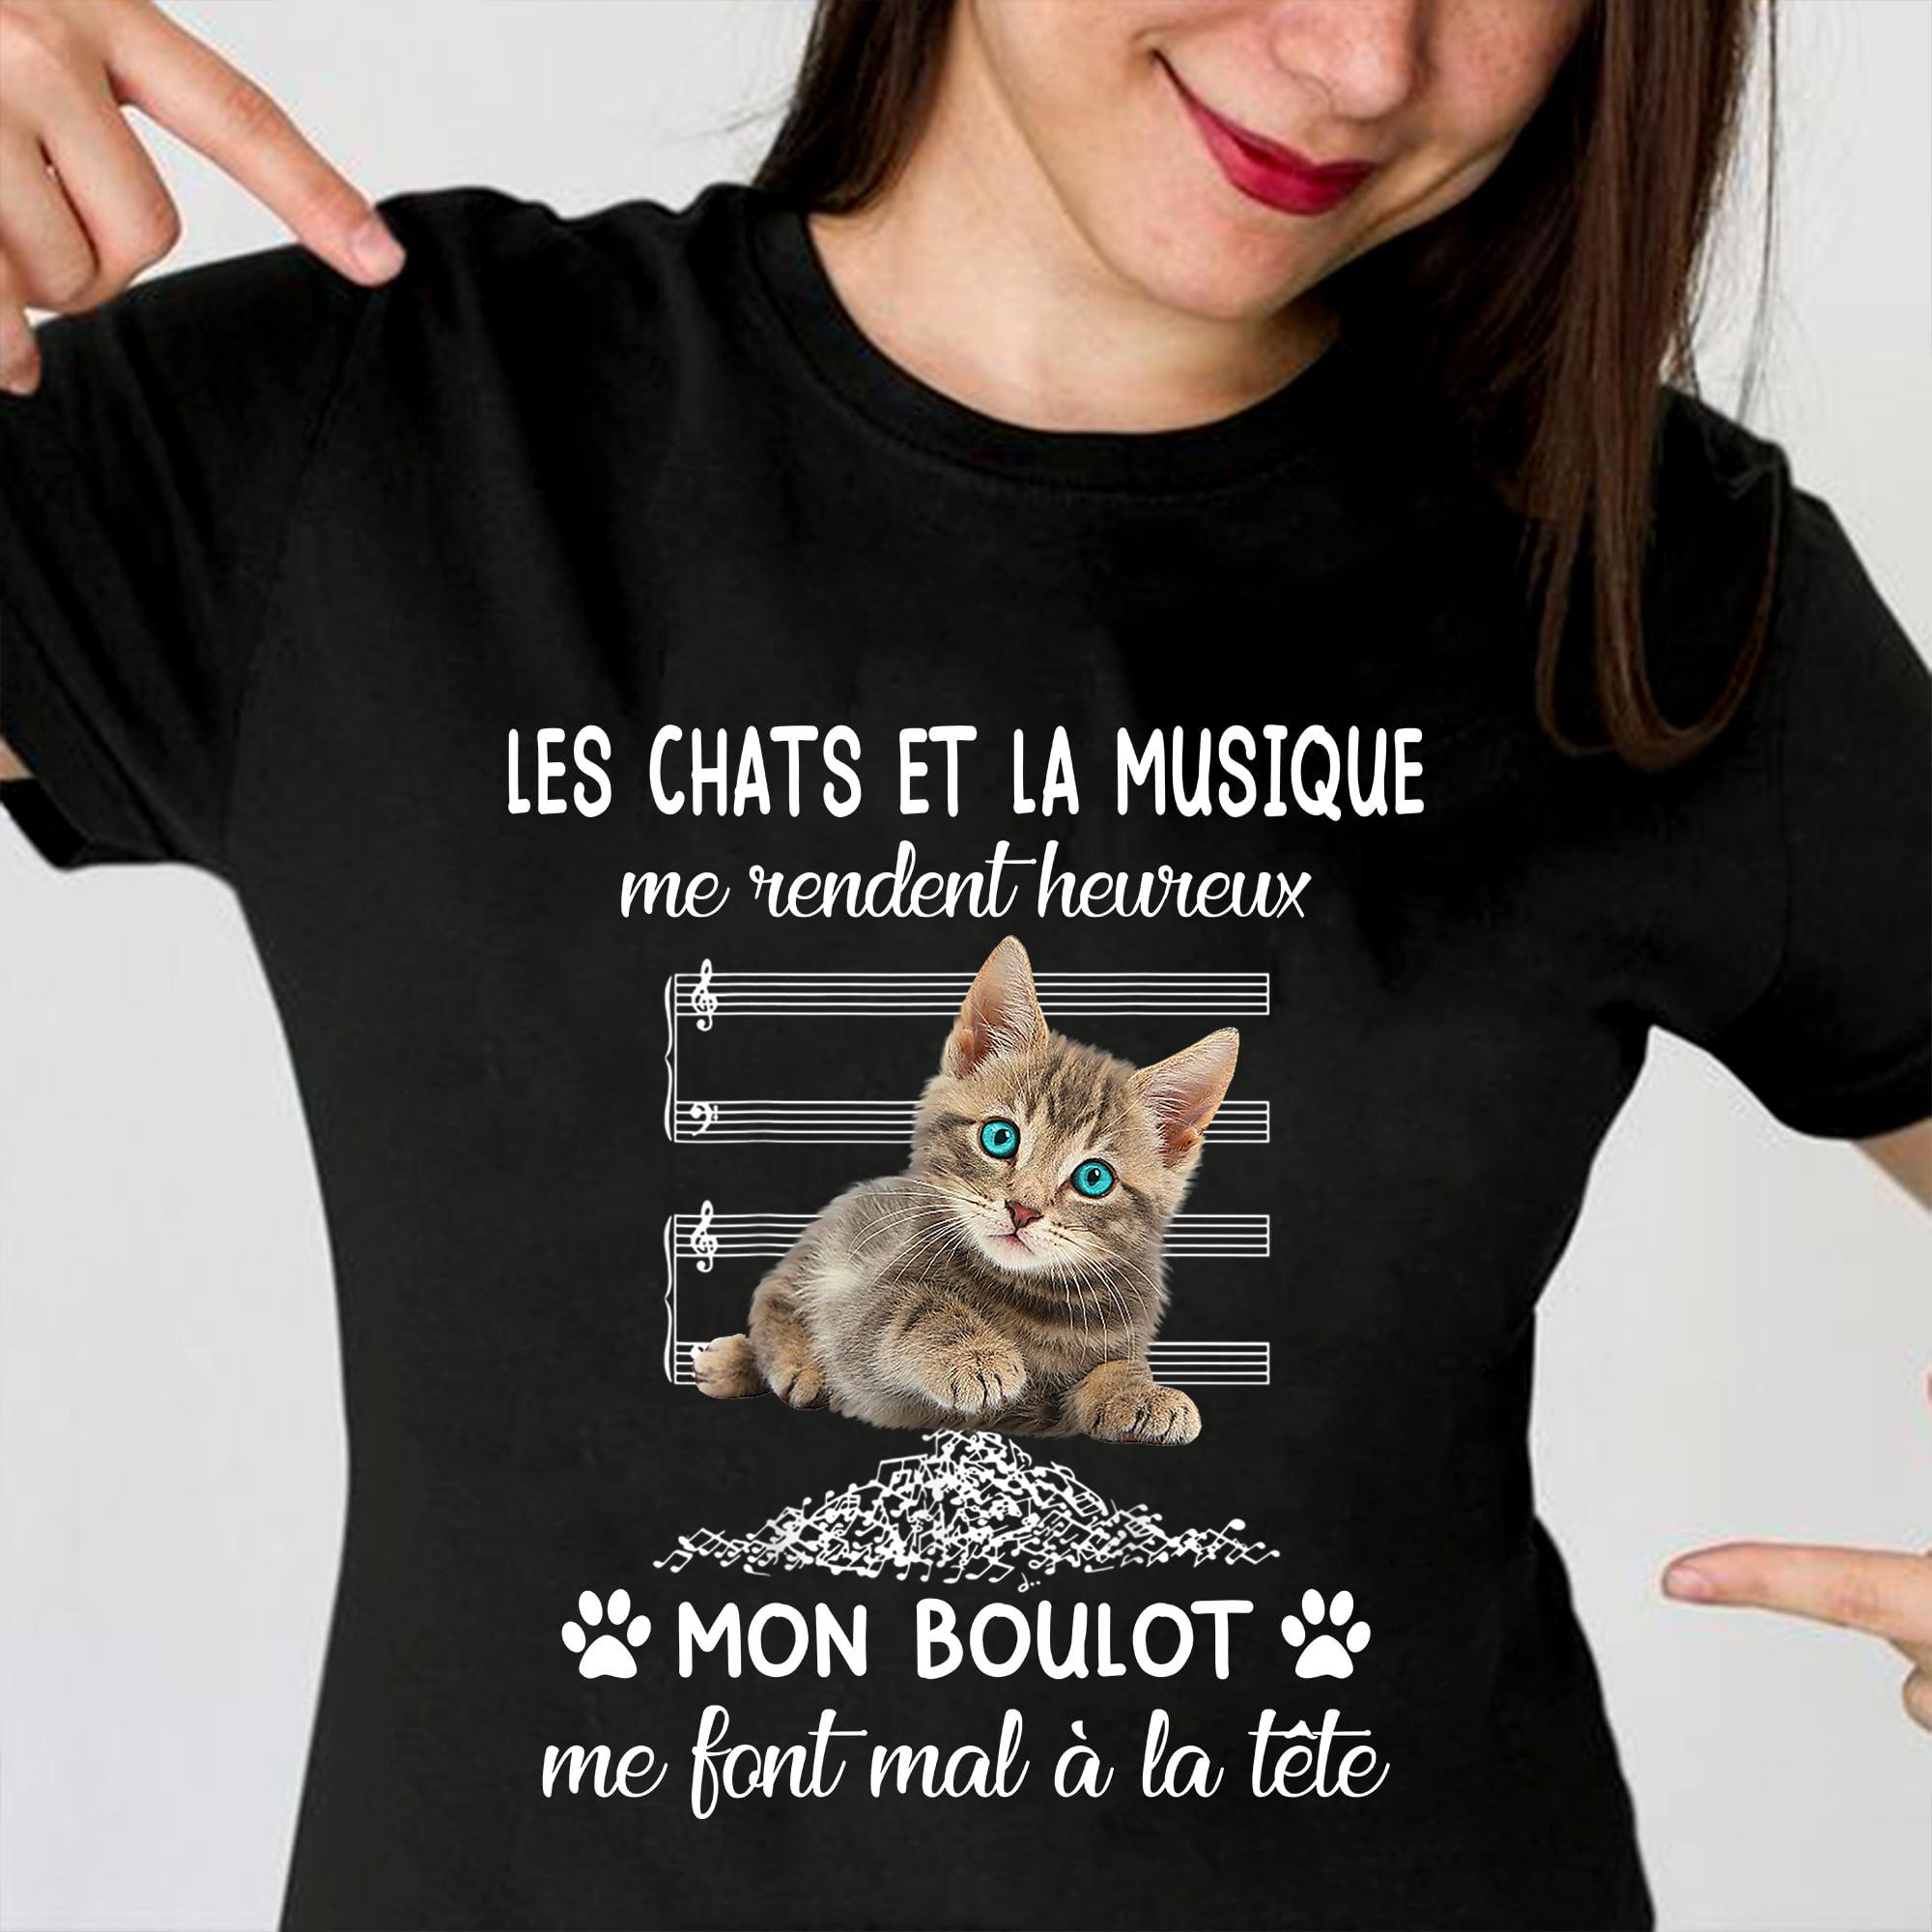 Les chats et la musique - Music and kitty cat, gift for cat lover